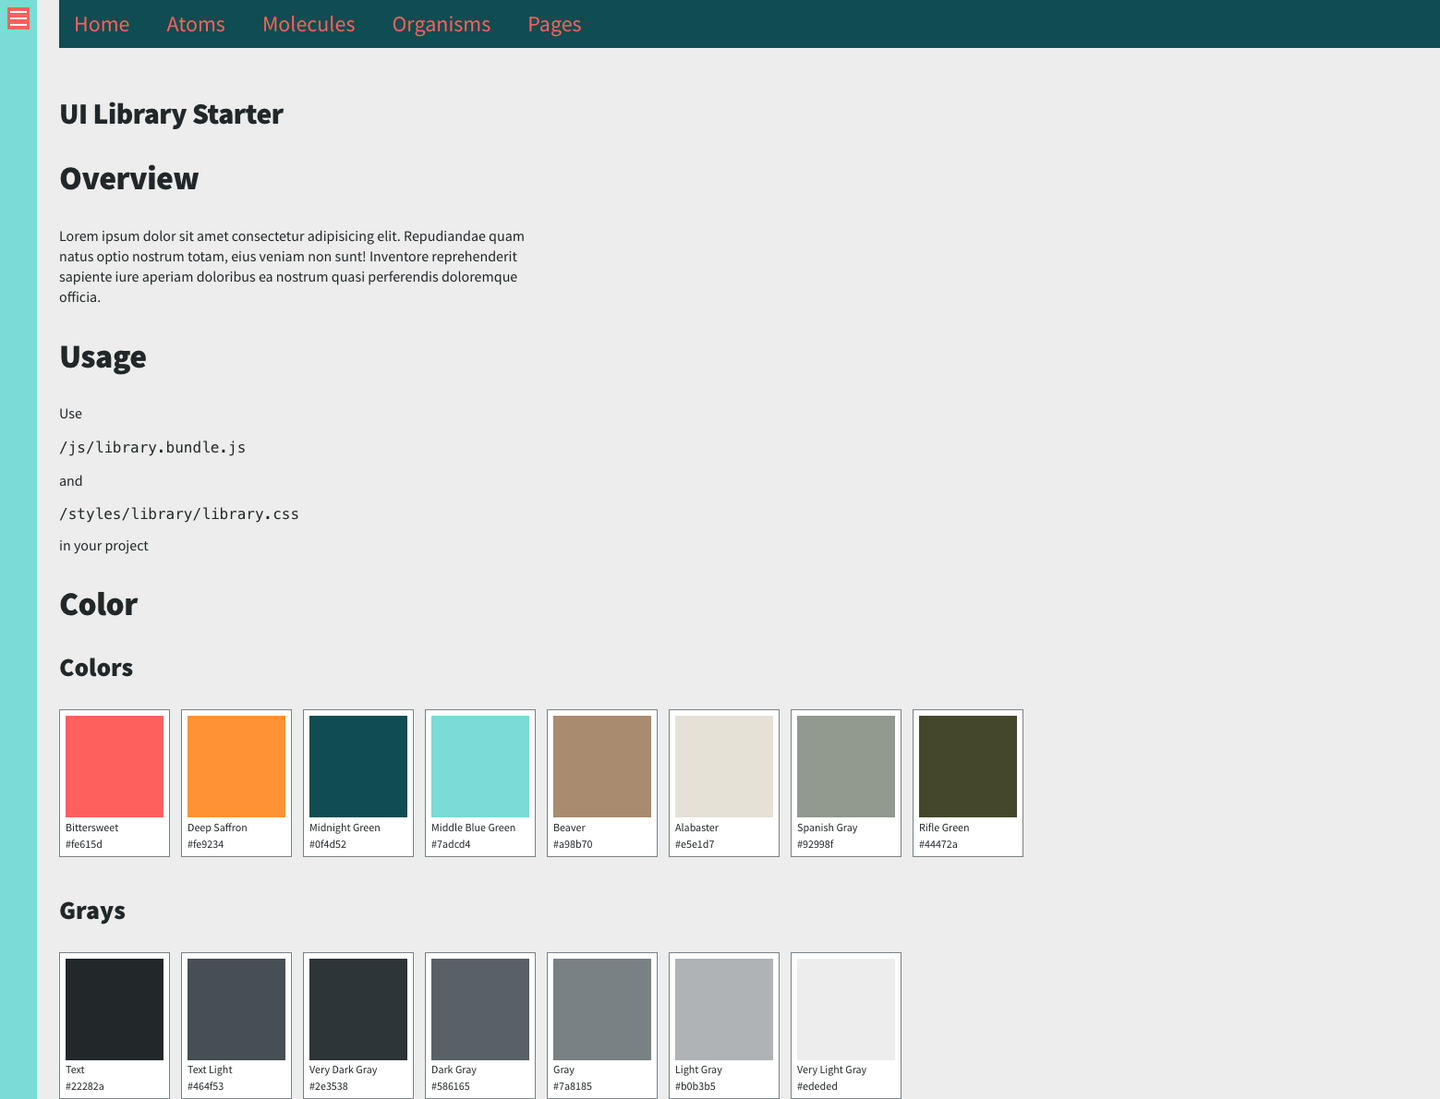 Screenshot of the UI Library Starter project, featuring the home page with an overview, usage, and color swatches.